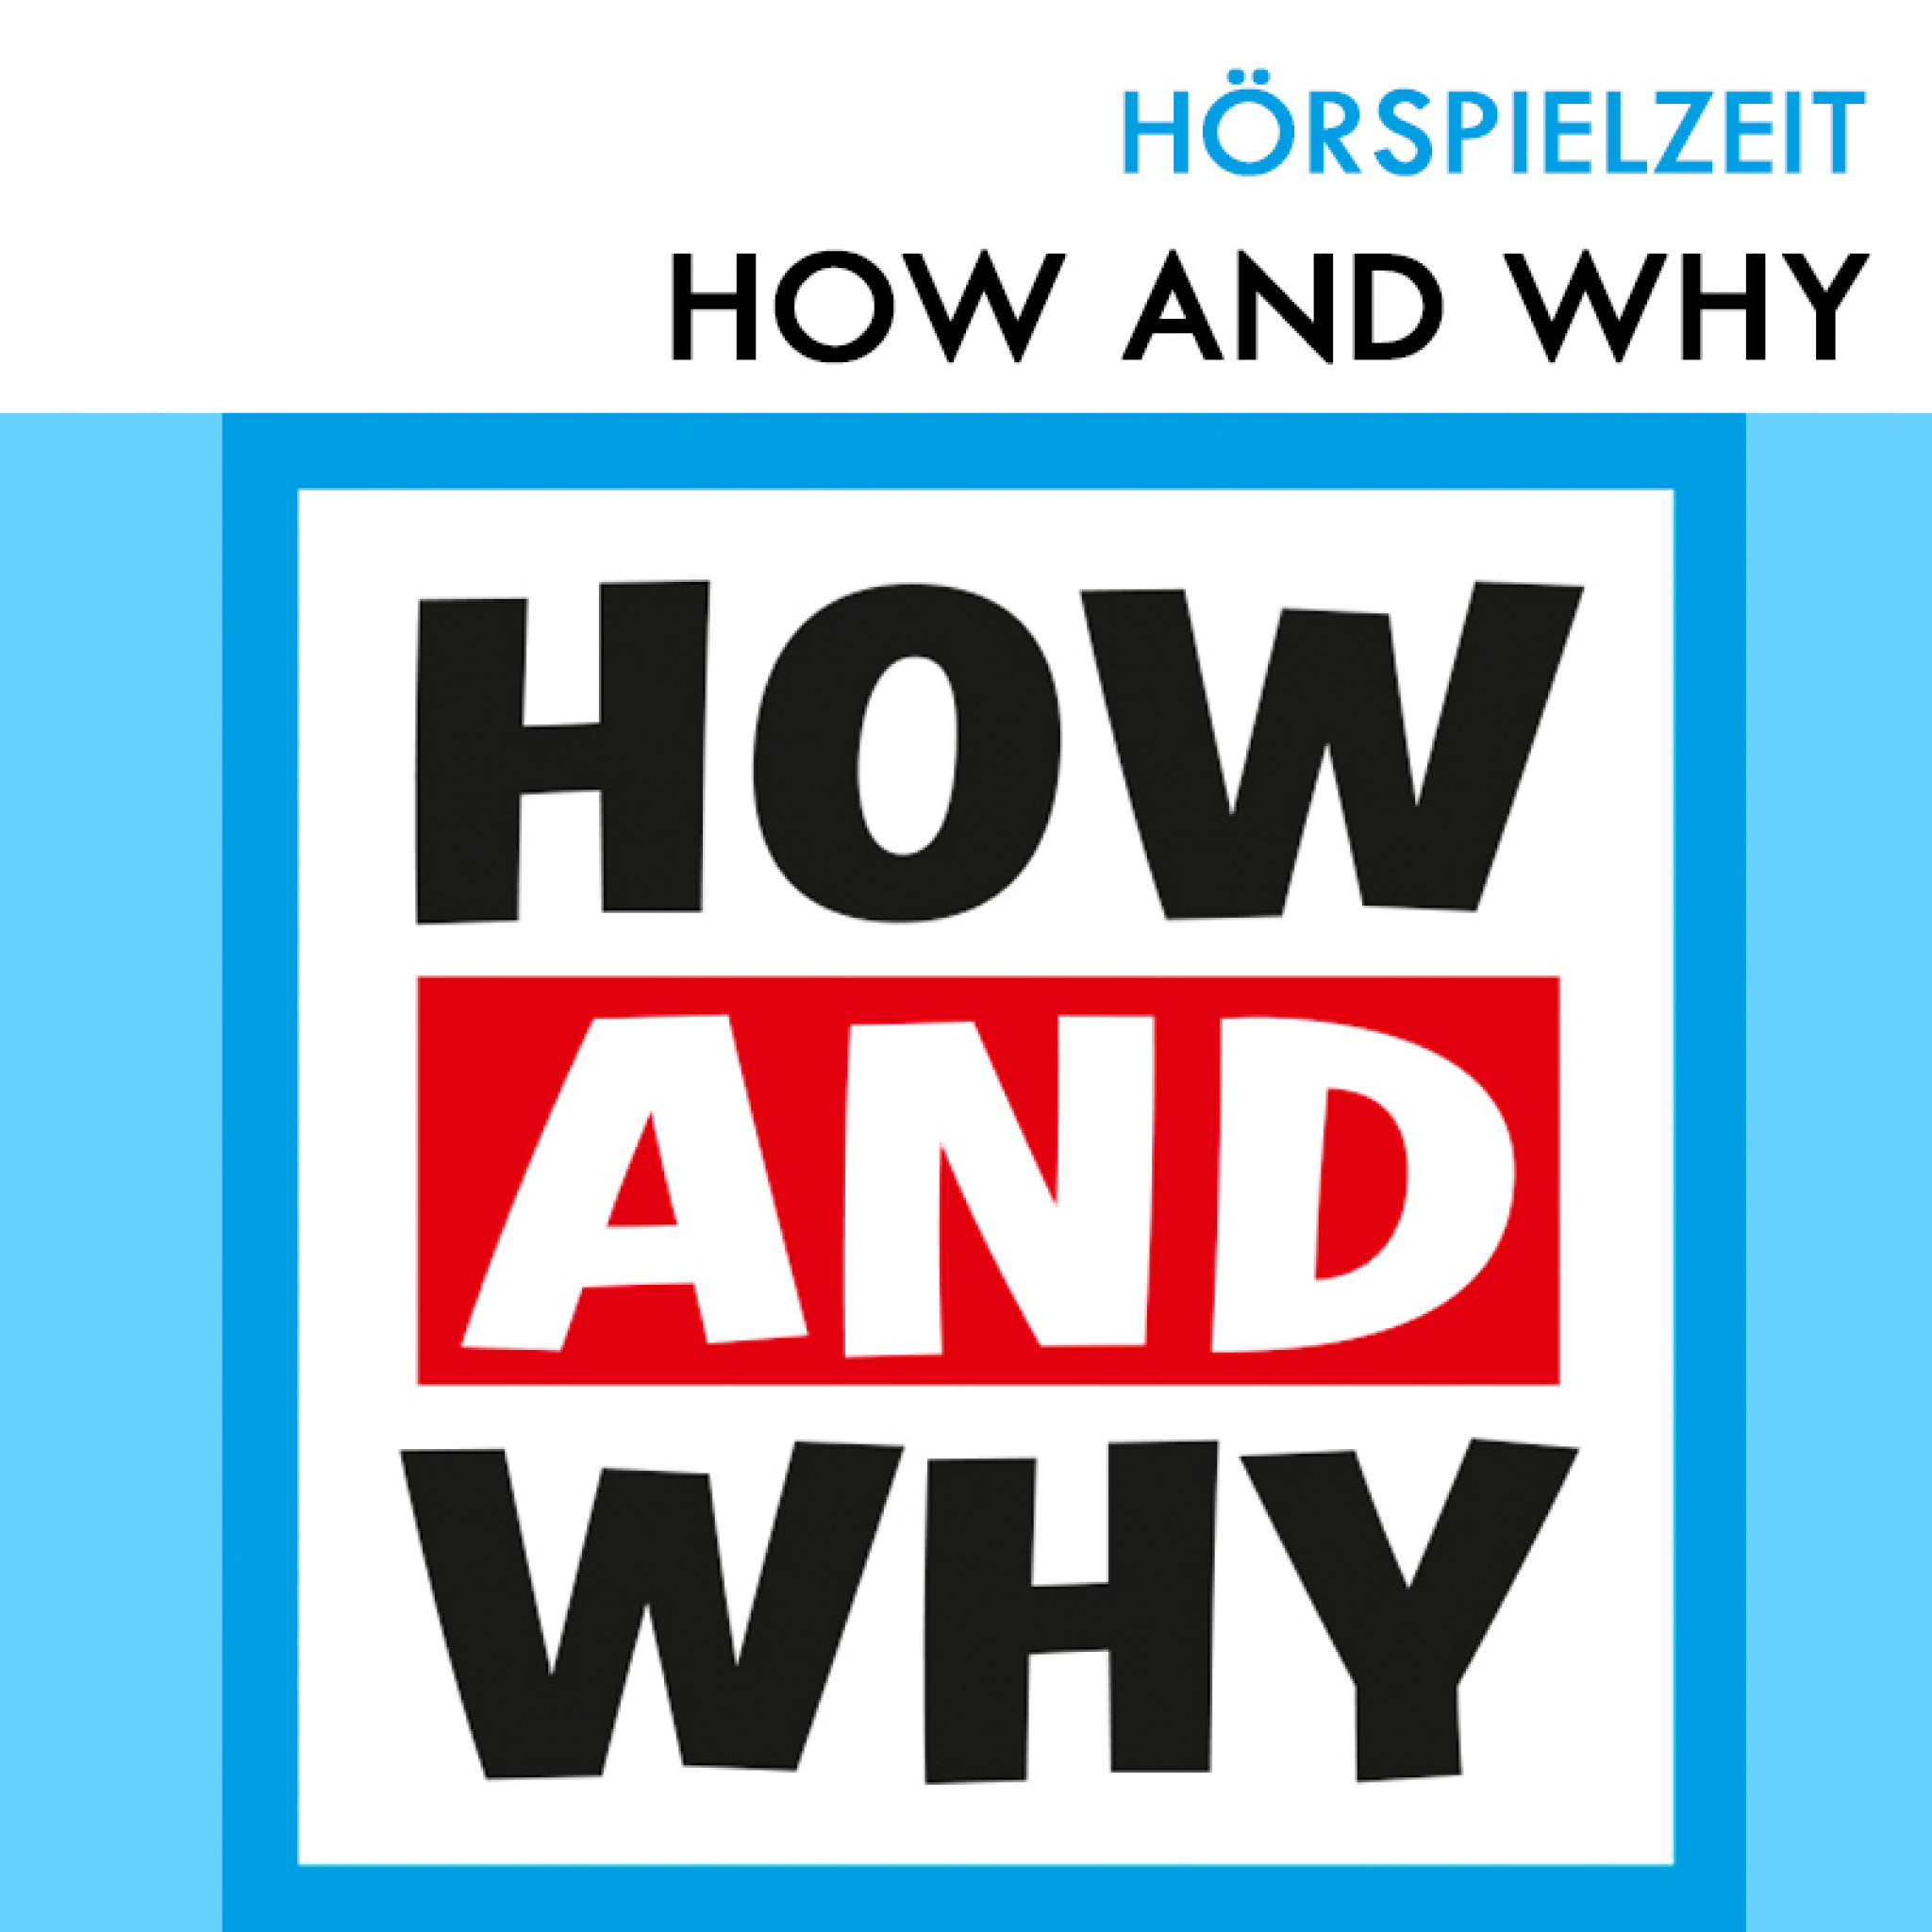 HOW AND WHY Hörspielzeit